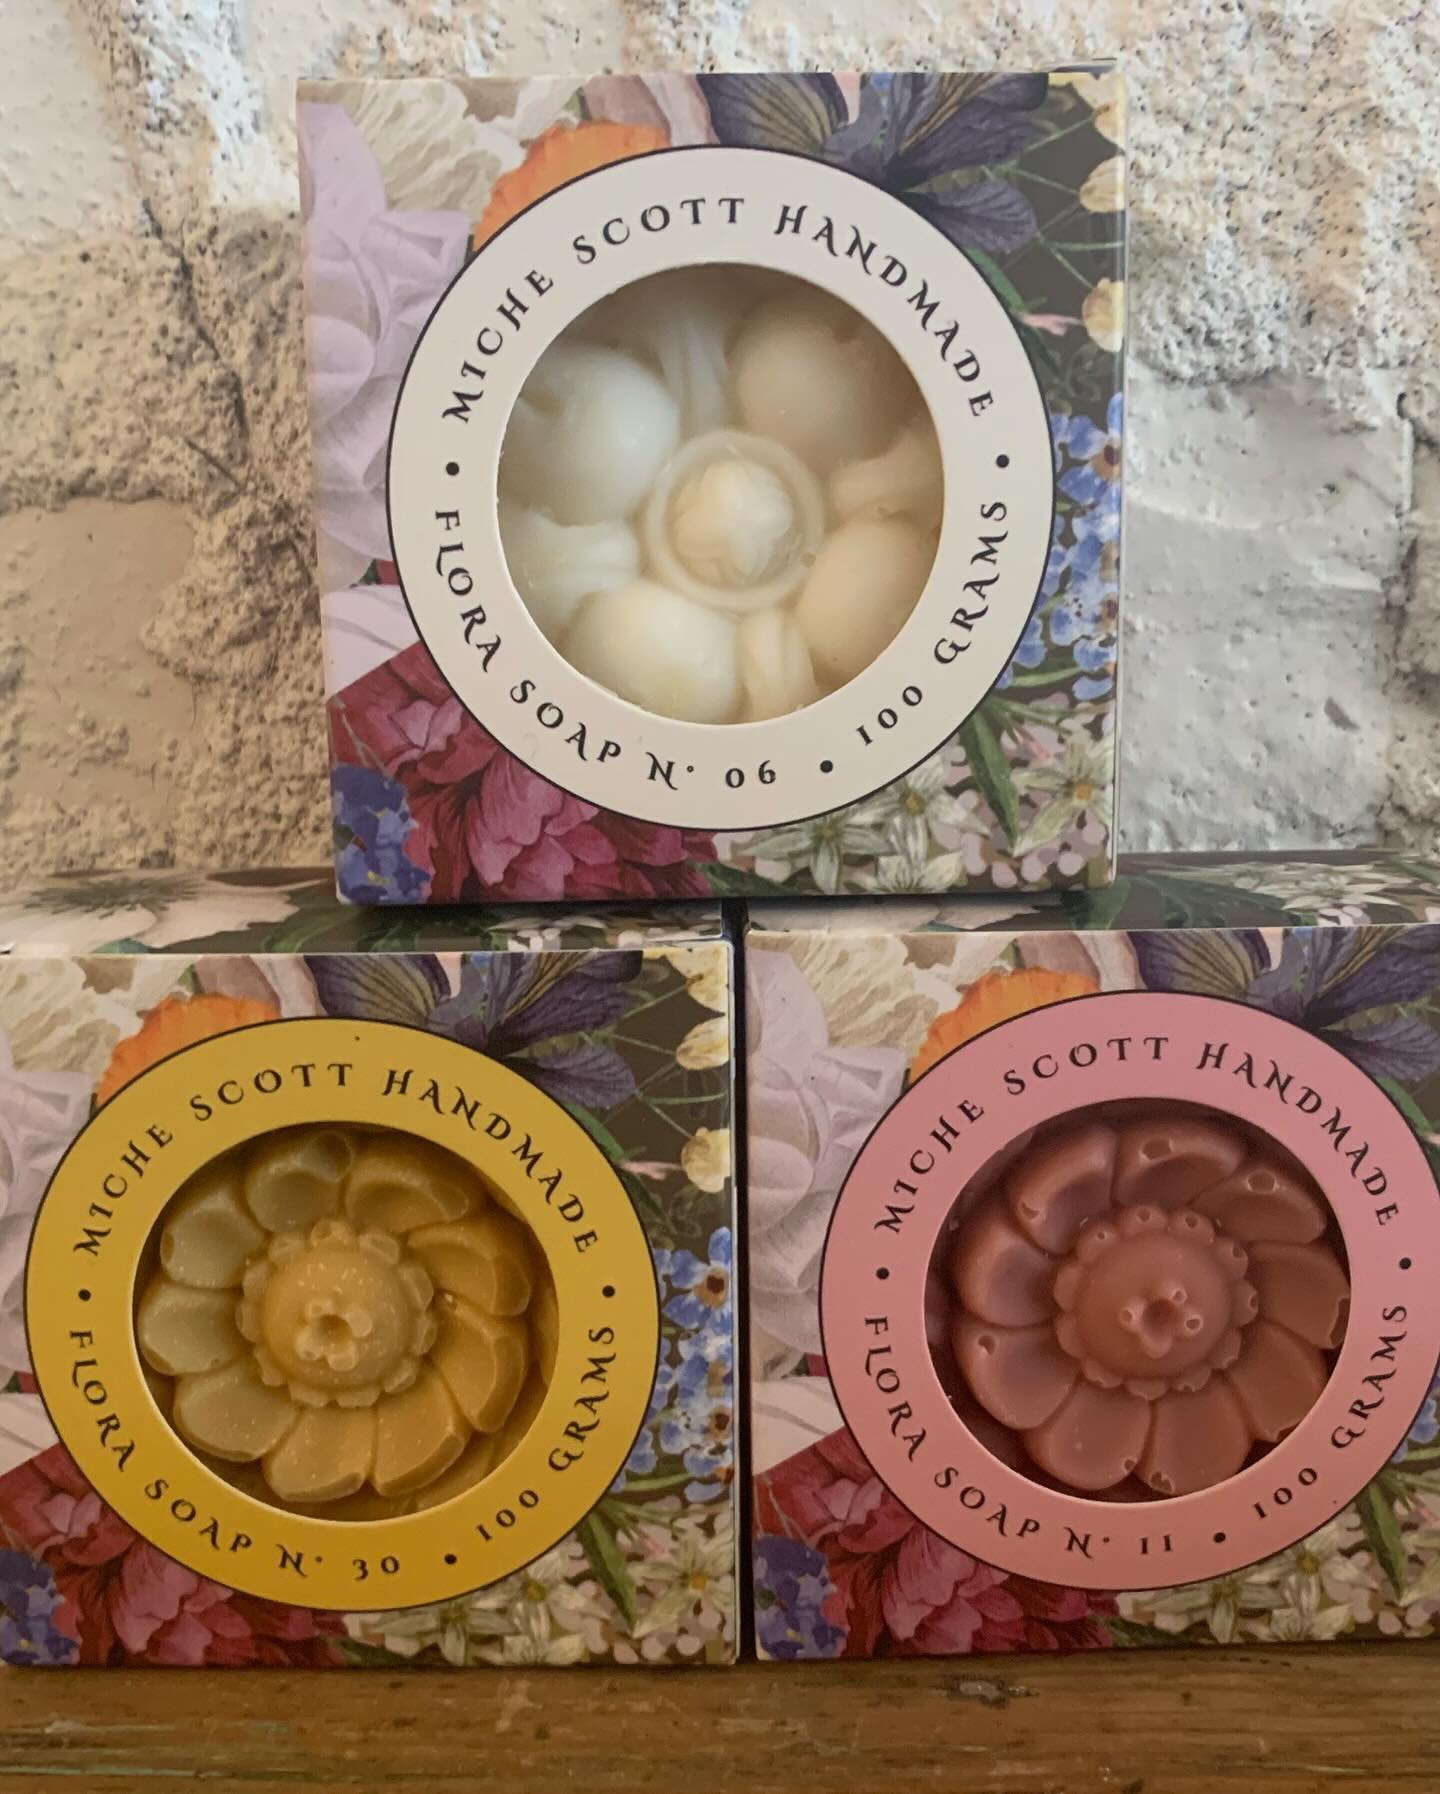 We just got the most beautiful handmade soaps from @michescotthandmade. They are crafted in small batches and hand poured which makes each one unique. Would make really lovely Mothers Day gifts.

#handmade #michescott #handpoured #mothersday #shoploc